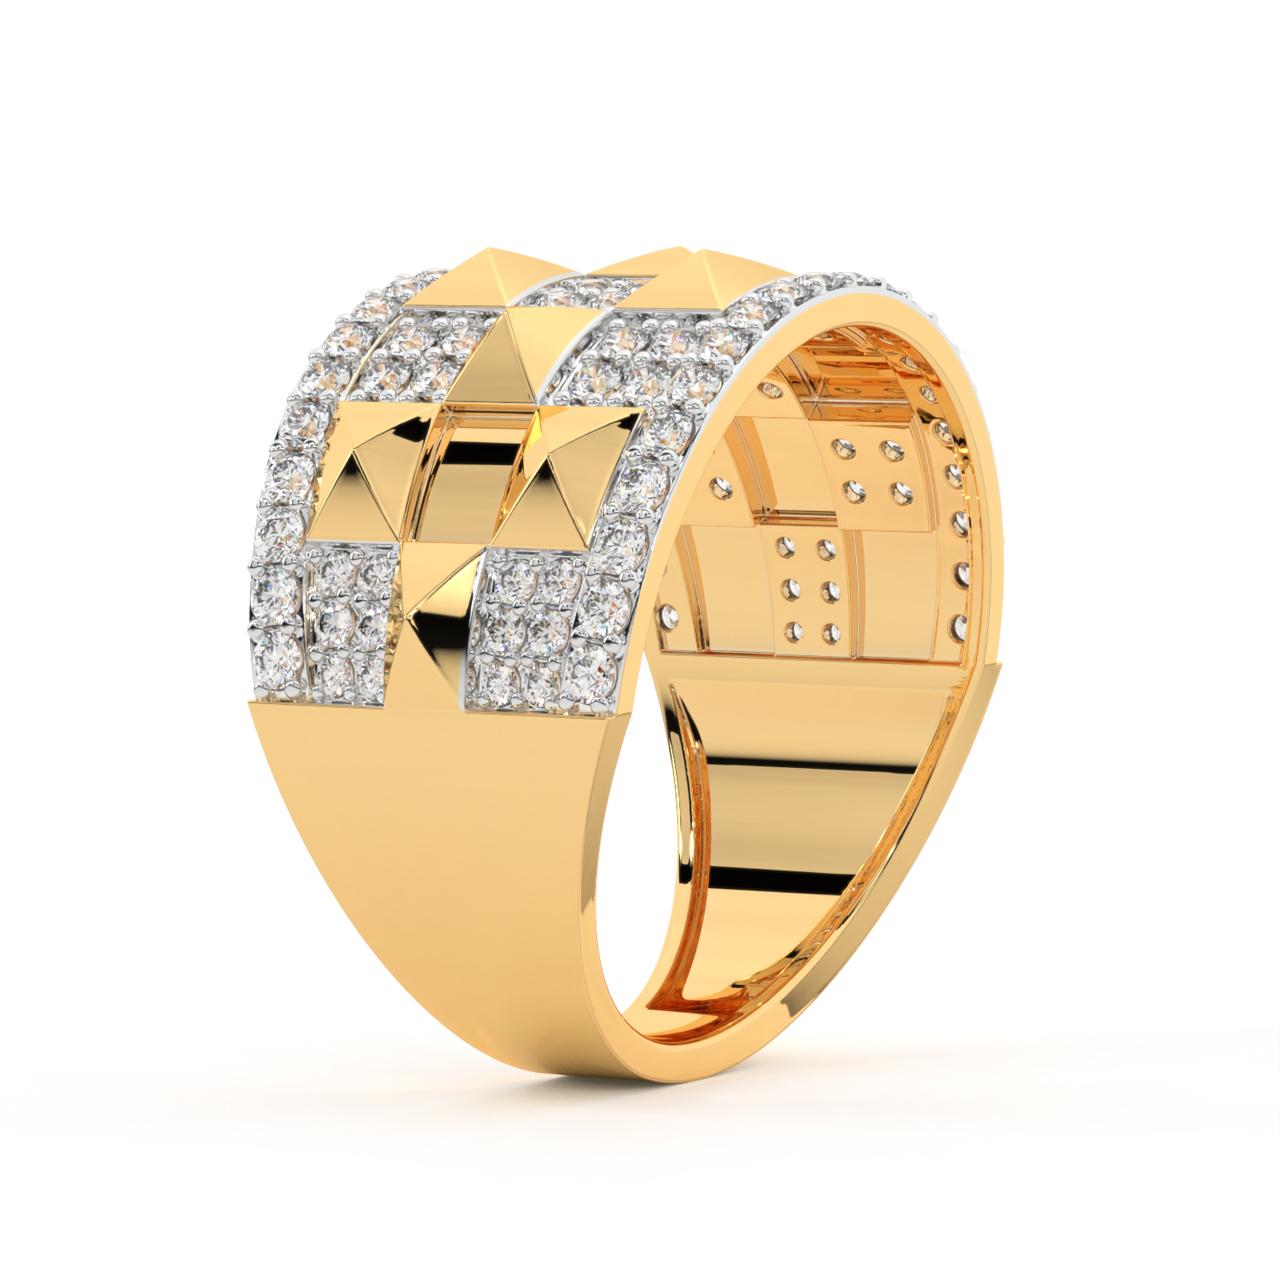 MEN'S YELLOW GOLD FASHION RING WITH TWO DIAMONDS, 5/8 CT TW - Howard's  Jewelry Center